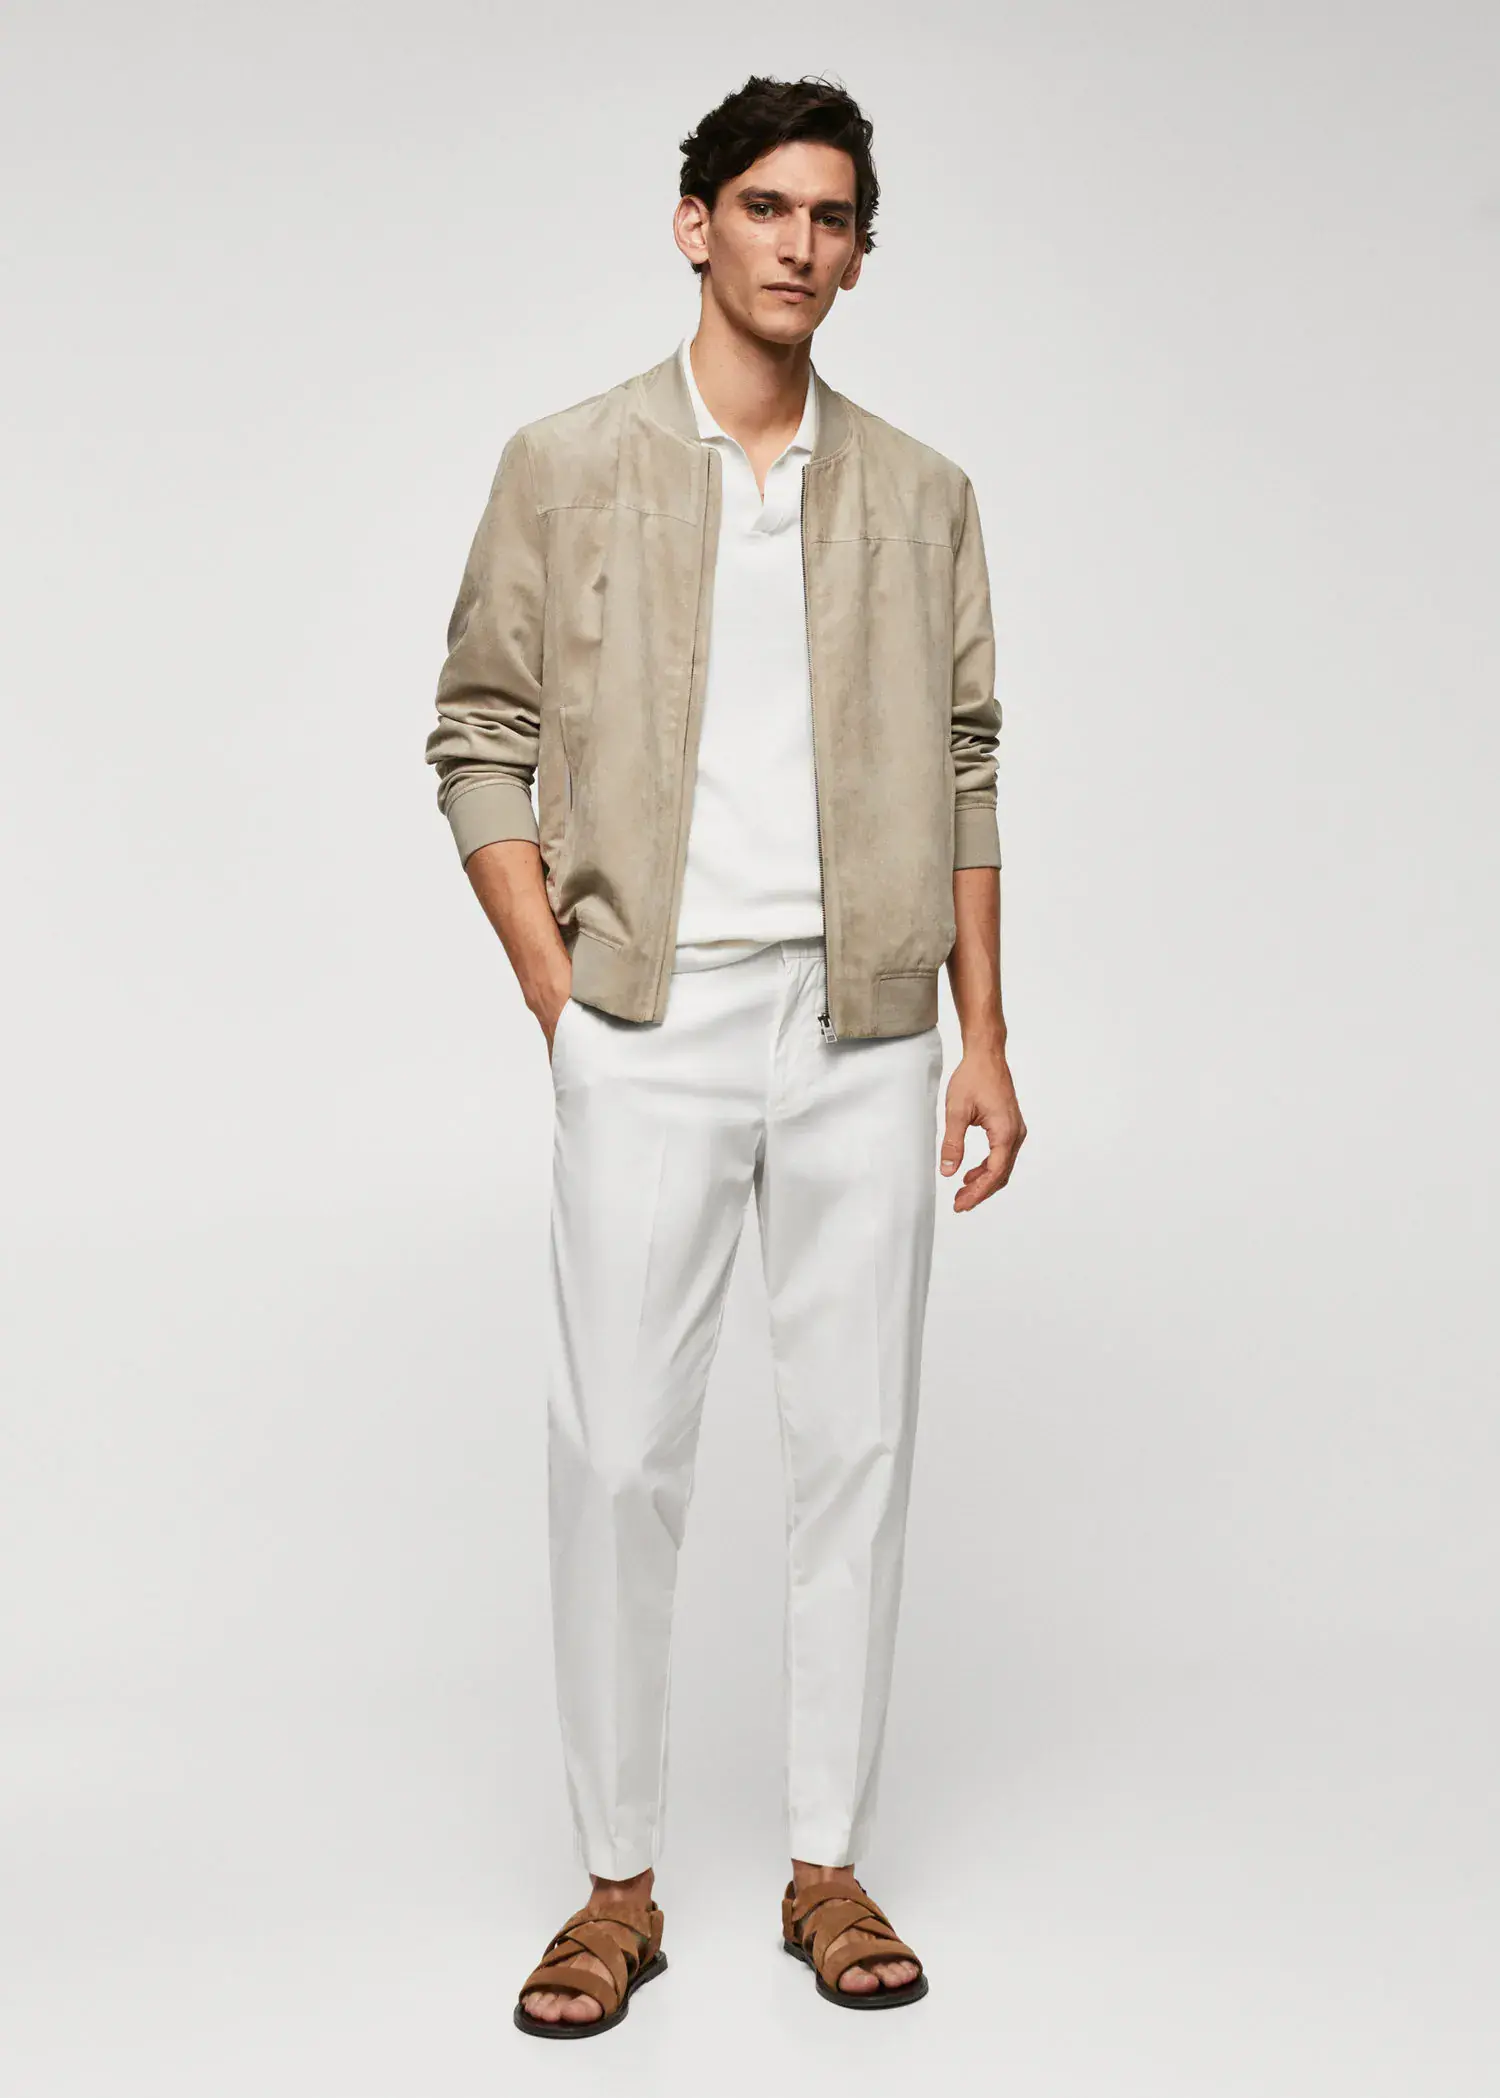 Mango Slim-fit cotton trousers. a man in a tan jacket and white pants. 